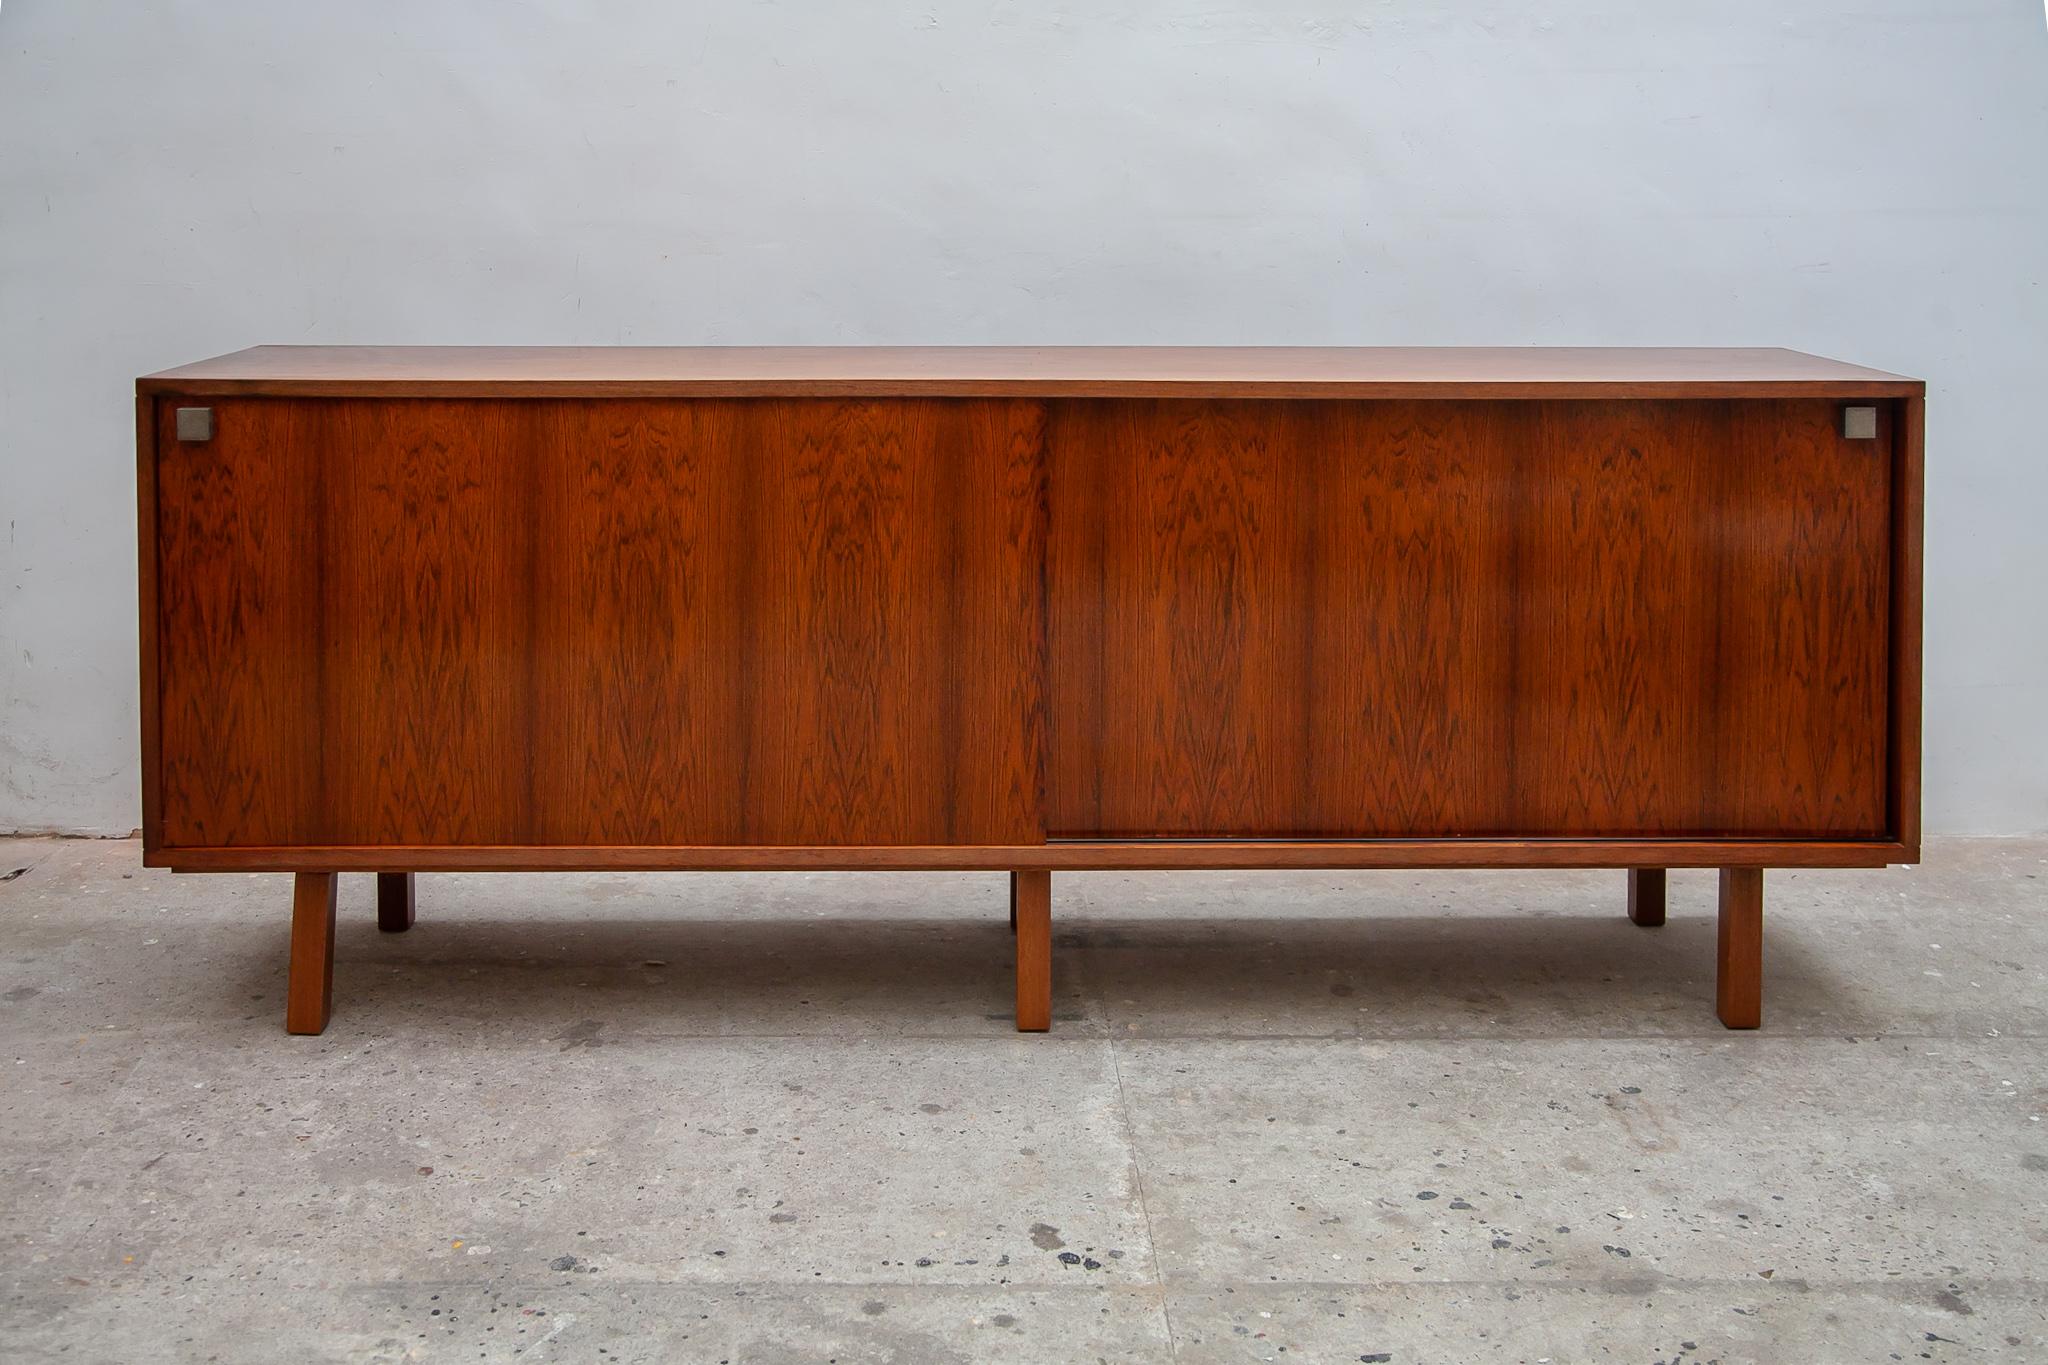 Minimalist sideboard by Alfred Hendrickx for Belform, Belgium 1960s. This sideboard, credenza features the original legs in wood and doorhandles in brushed steel with 2 sliding doors, interior 2 large shelves and 2 drawers it's a design pure sang